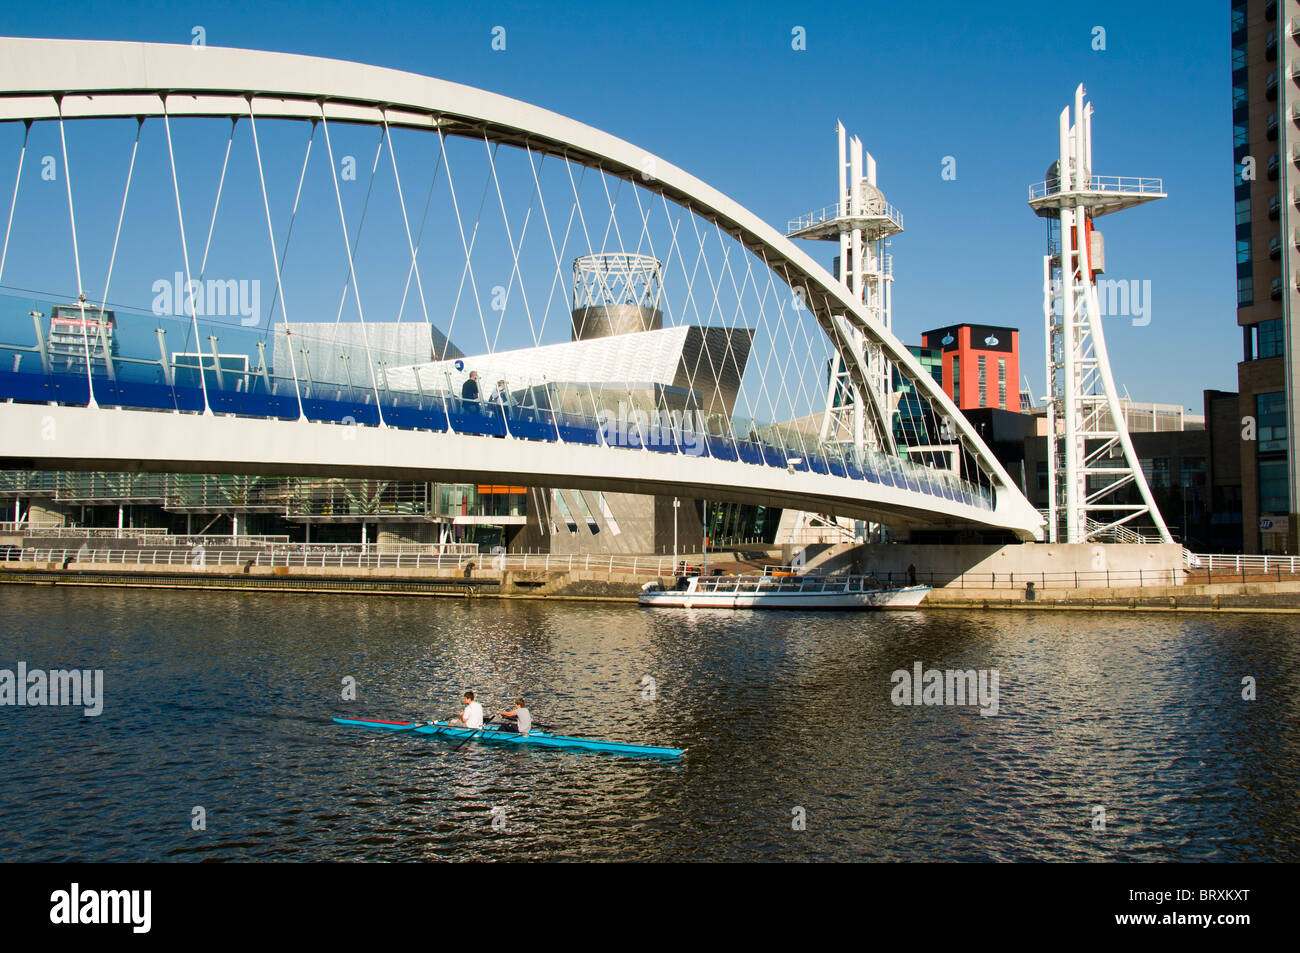 Sculling (rowing) on the Manchester Ship Canal, under the Millennium (Lowry) footbridge, Salford Quays, Manchester, UK Stock Photo